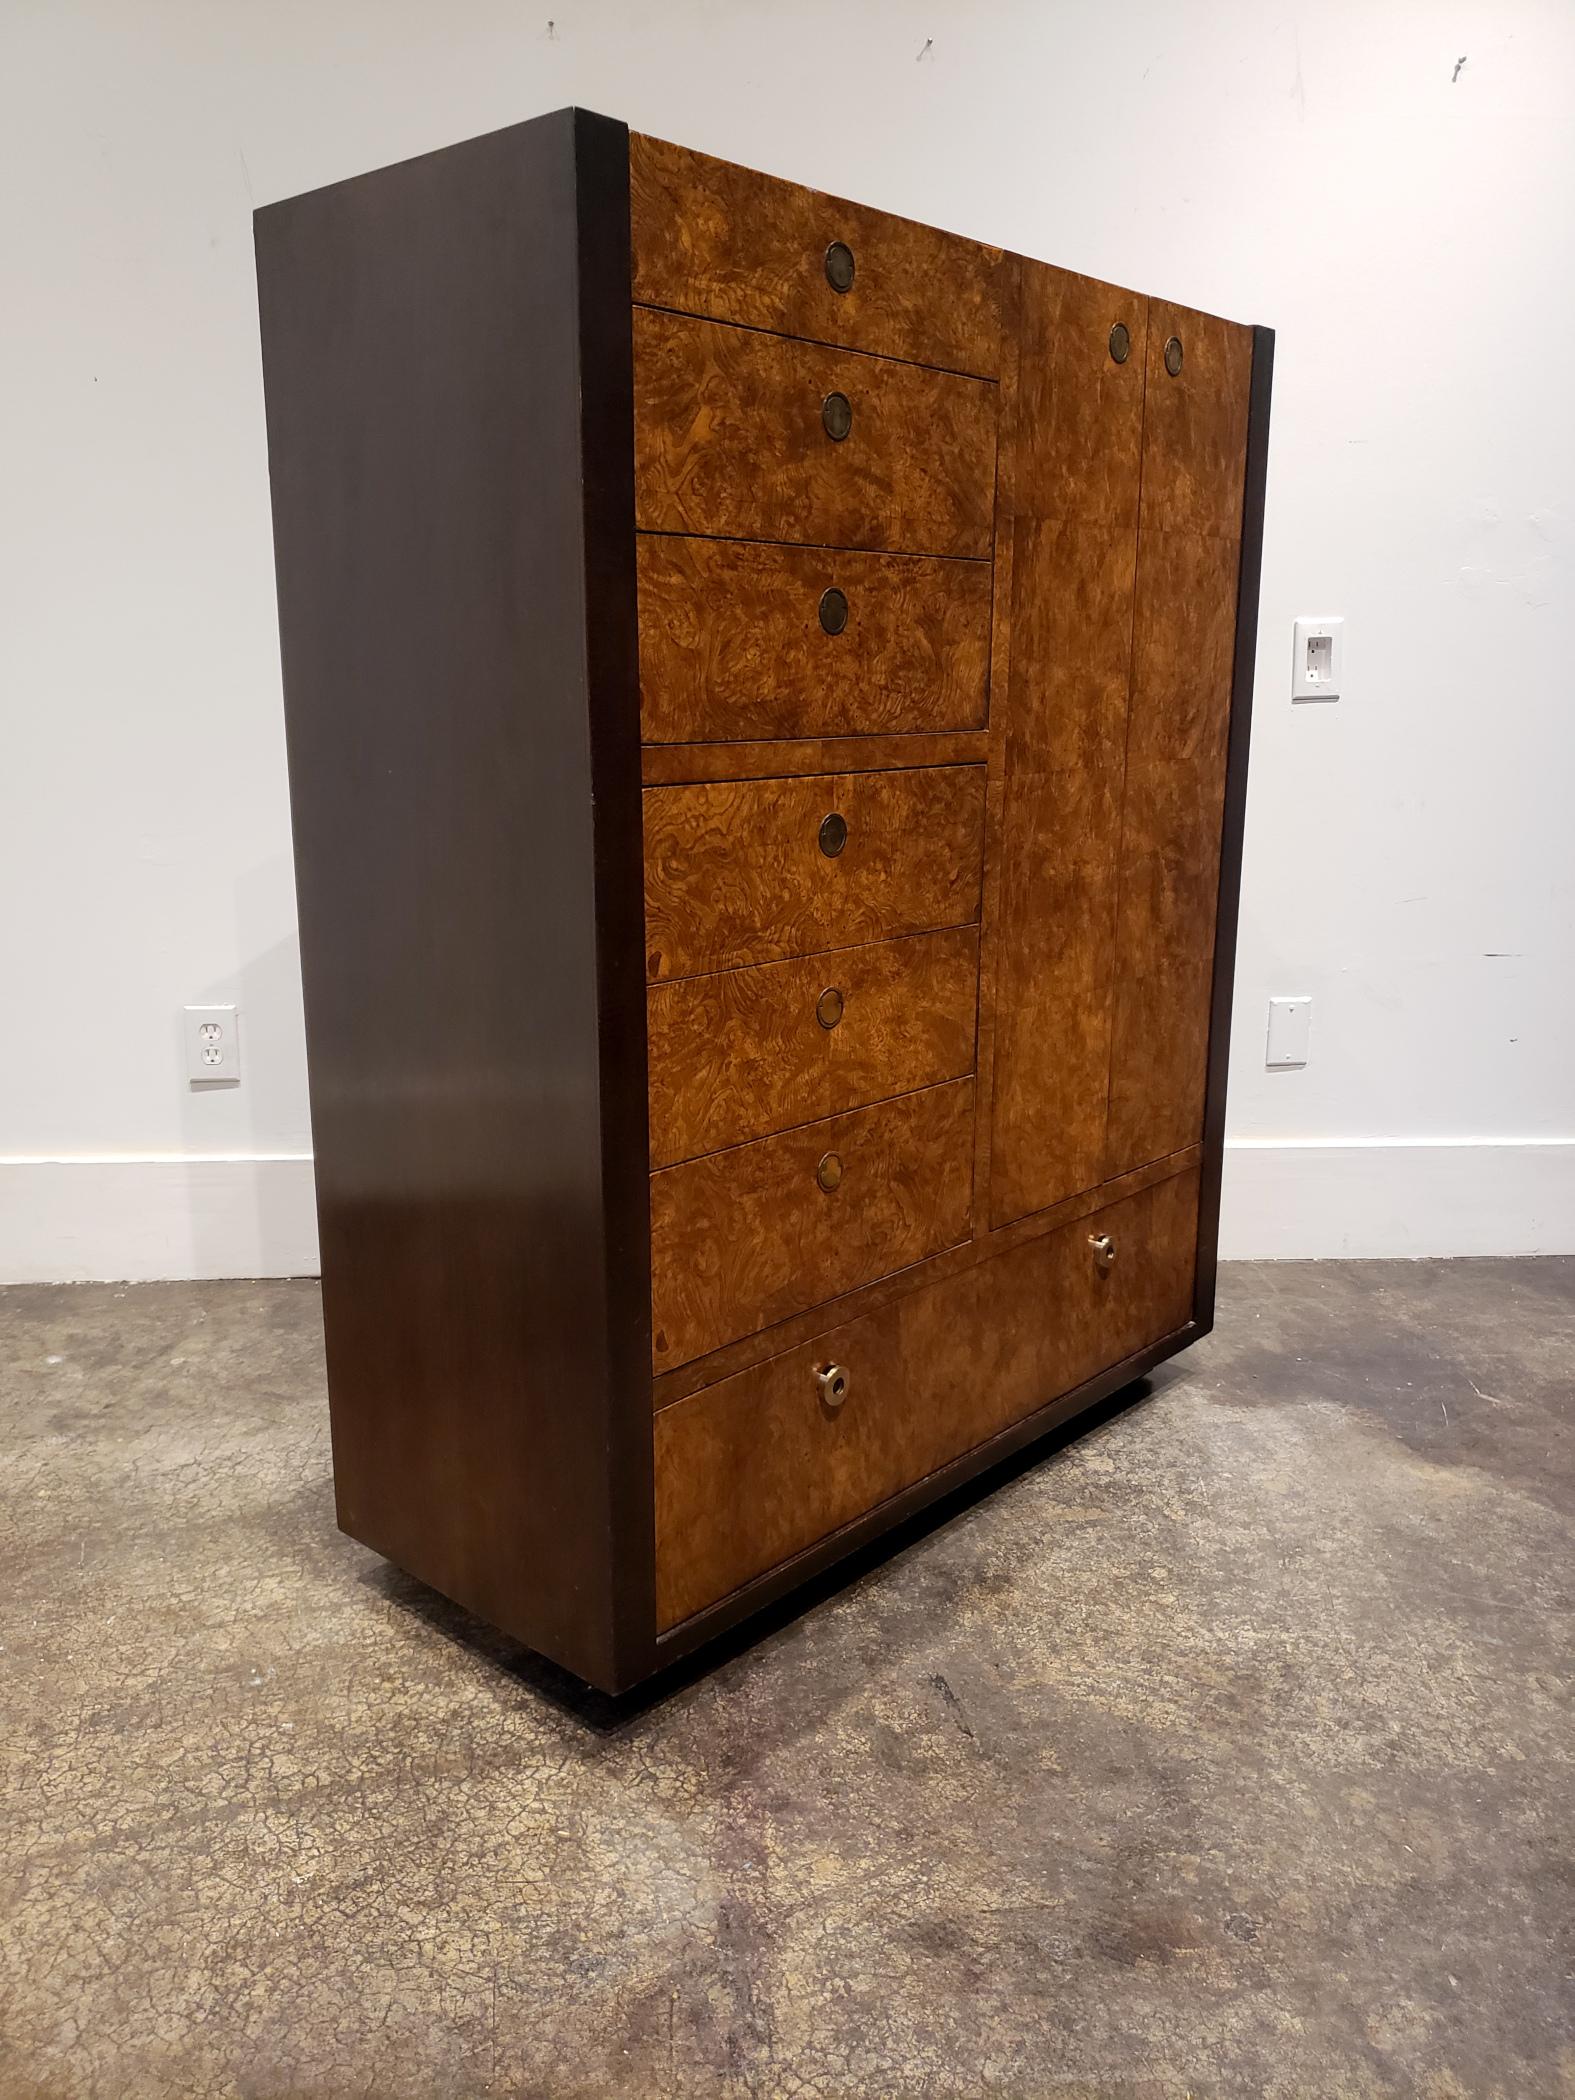 Milo Baughman style 1970s high chest with dark walnut stained sides, beautiful burl wood veneer on front, and brass pulls. Stylish storage piece with 6 pull out drawers on the left side, 1 large pull out drawer at bottom and large cabinet space on